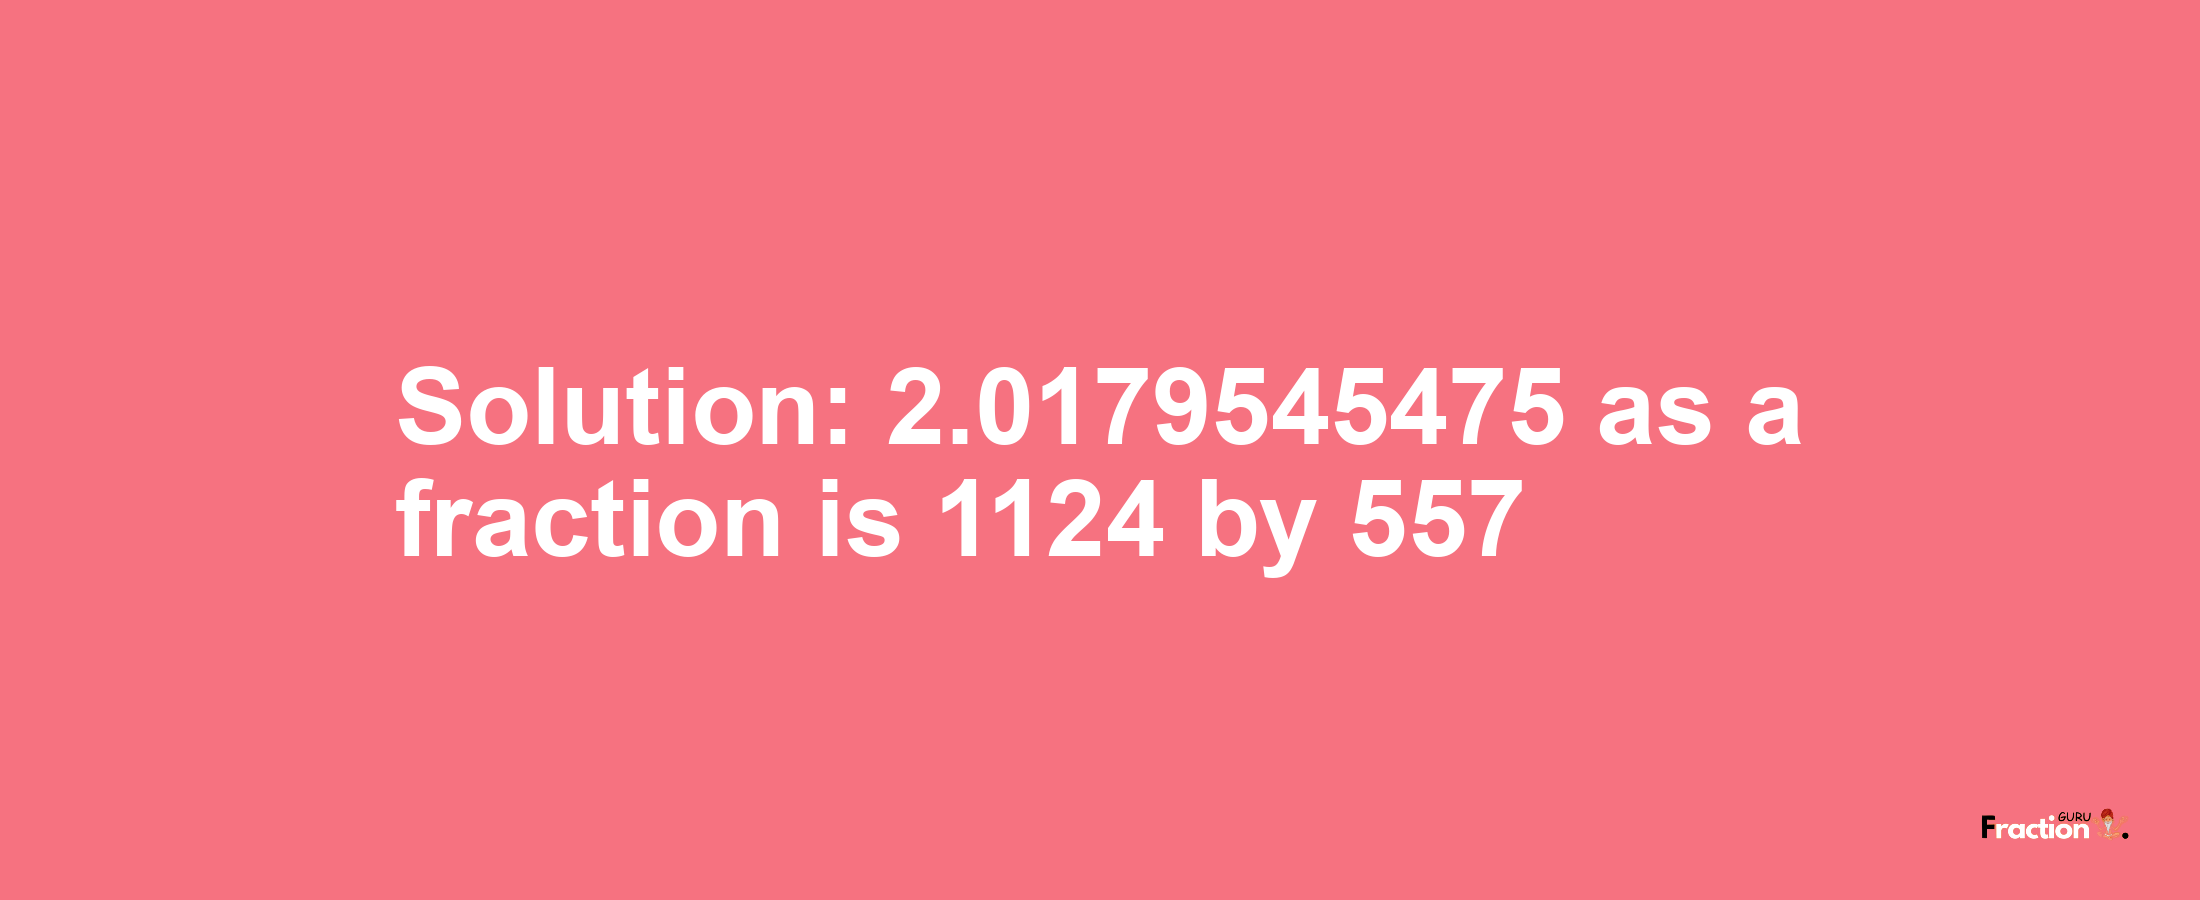 Solution:2.0179545475 as a fraction is 1124/557